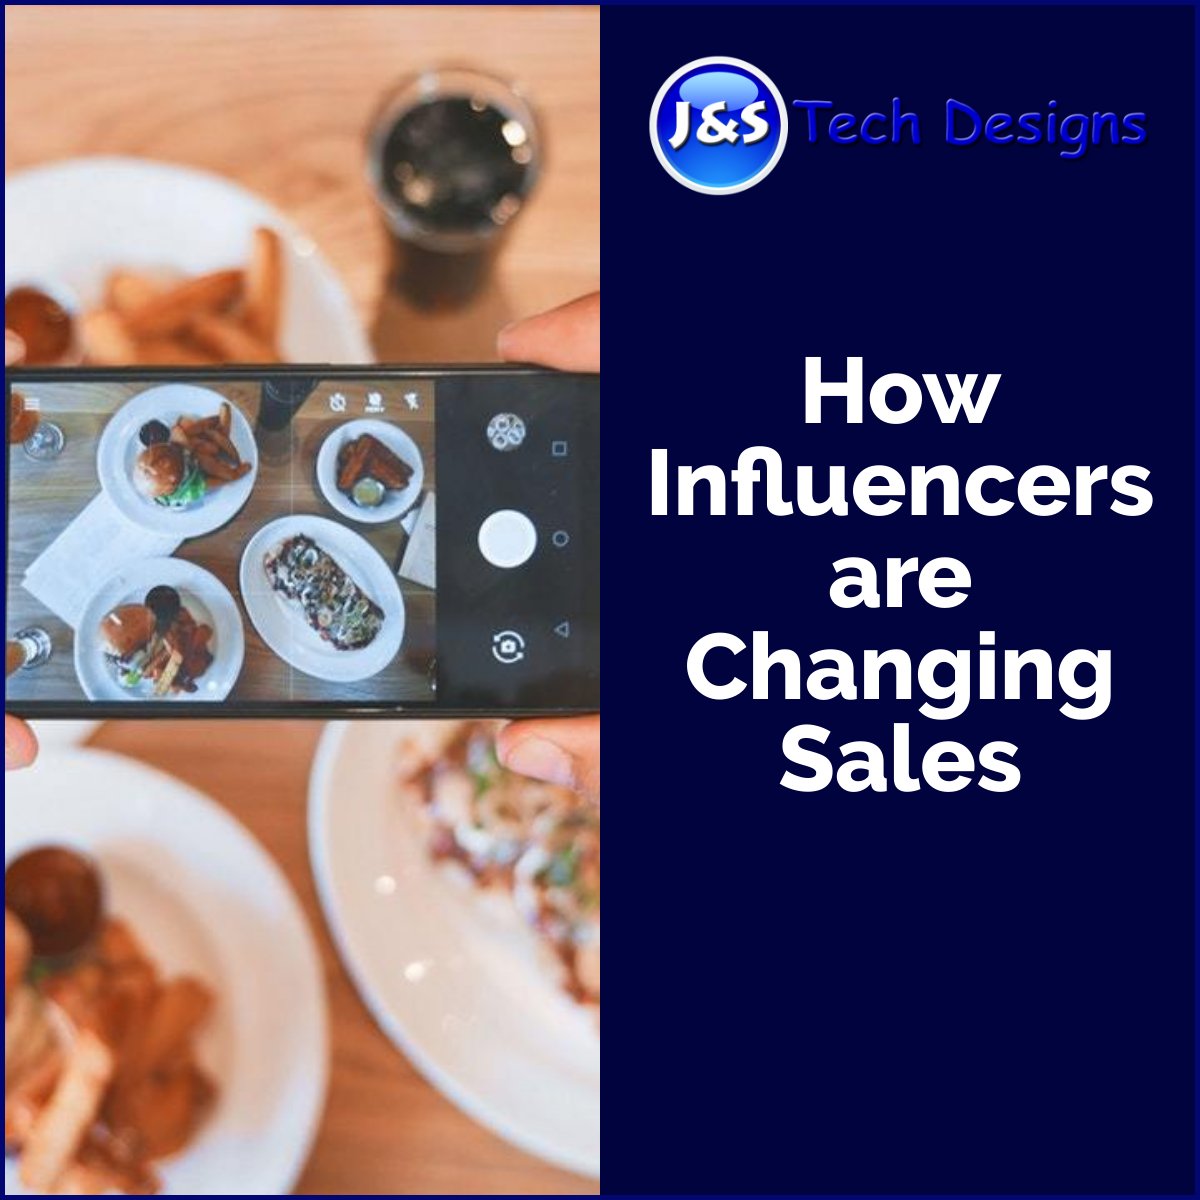 How Influencers are Changing Sales